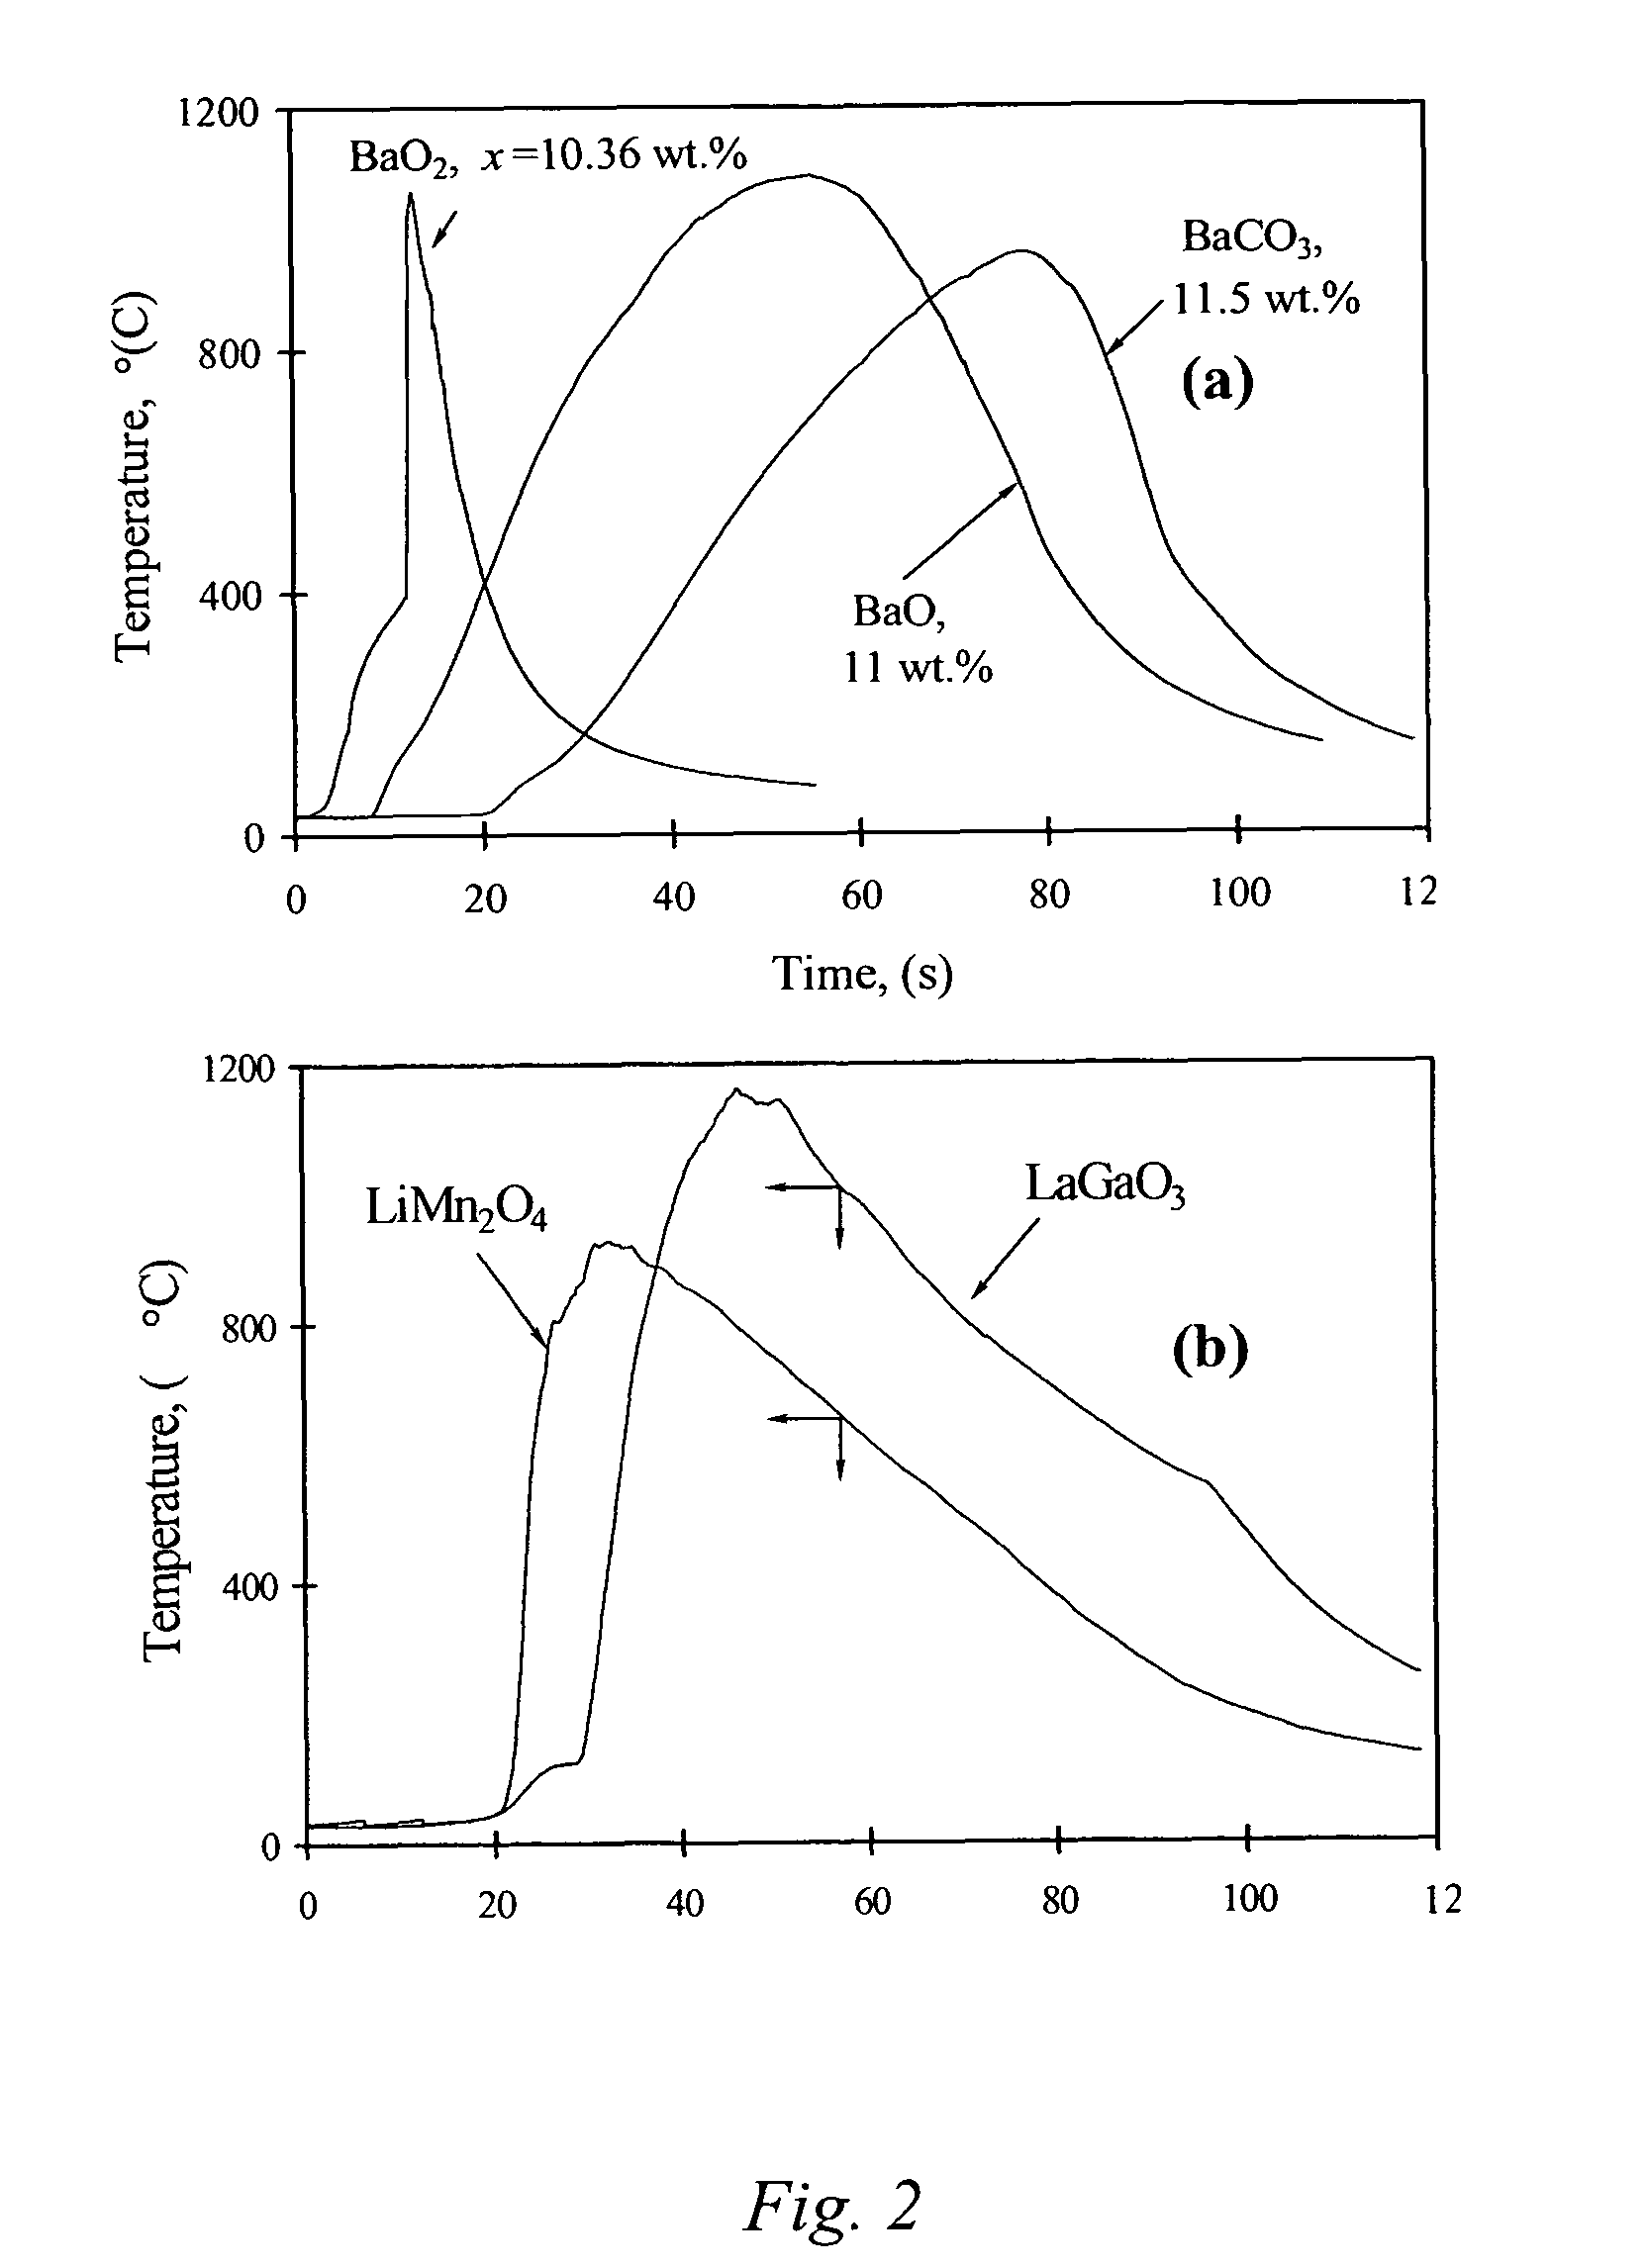 Carbon combustion synthesis of oxides